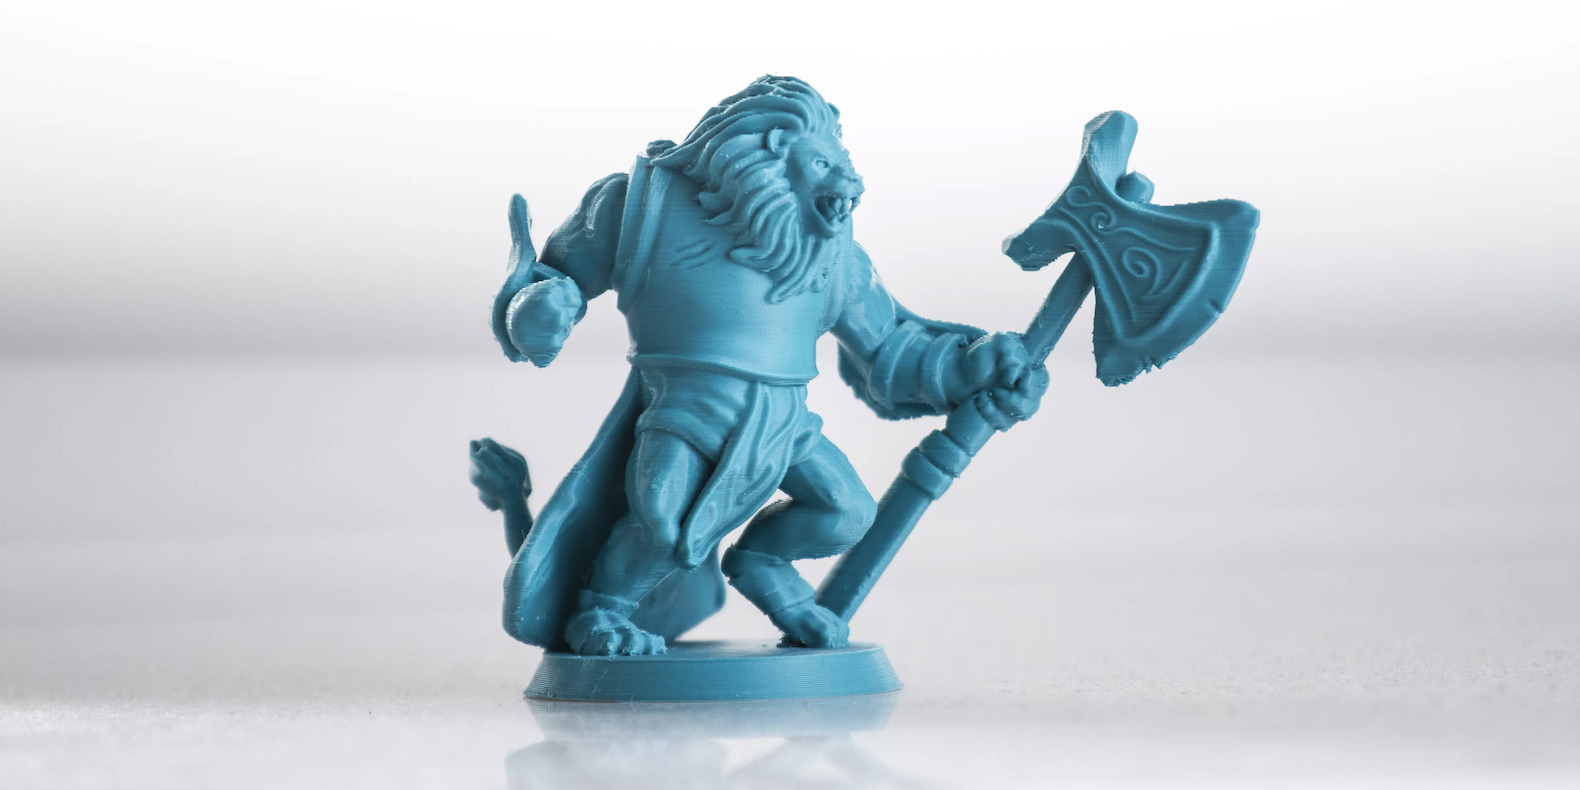 Here is a selection of the best 3D printable STL files for 3D printer to play Dungeons and Dragons